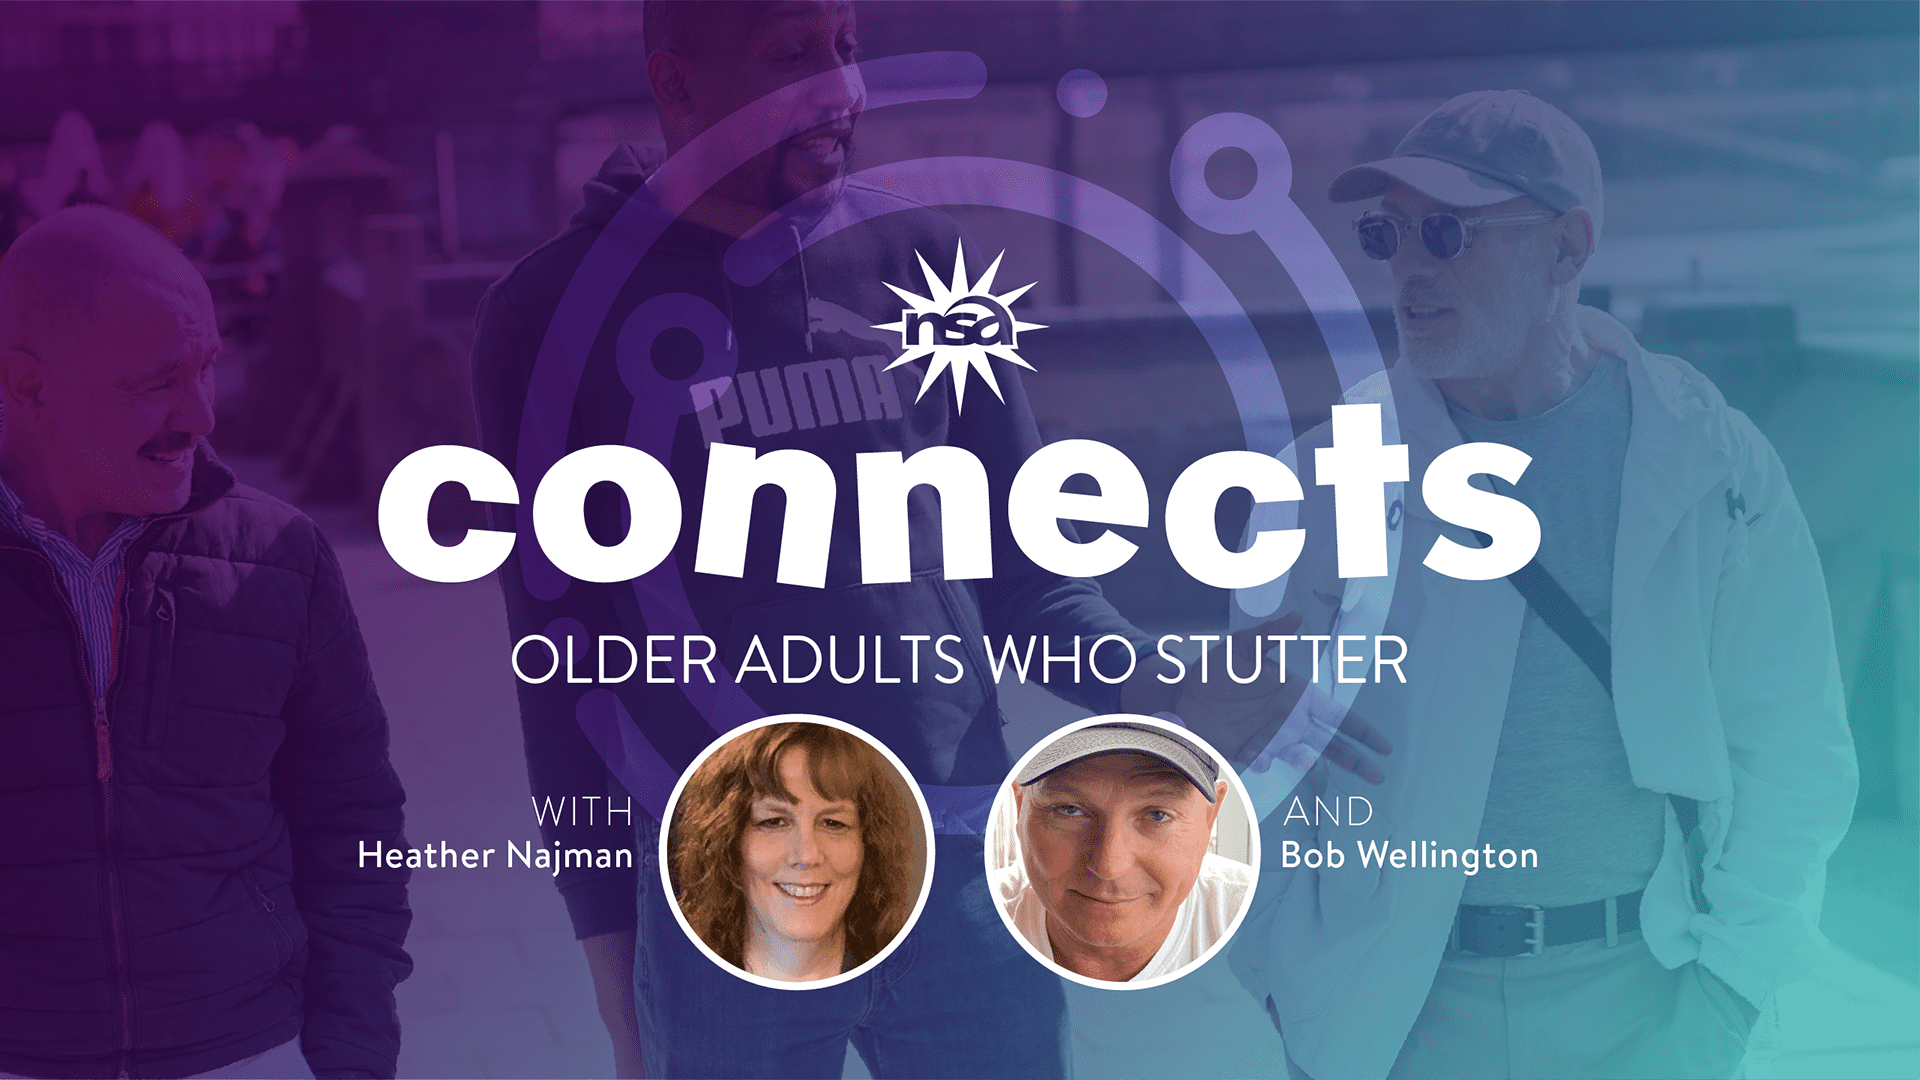 A promotional graphic titled "NSA Connects" for a program aimed at older adults who stutter. It features headshots of Heather Najman and Bob Wellington, overlaid on a background image of three older adults conversing outdoors.